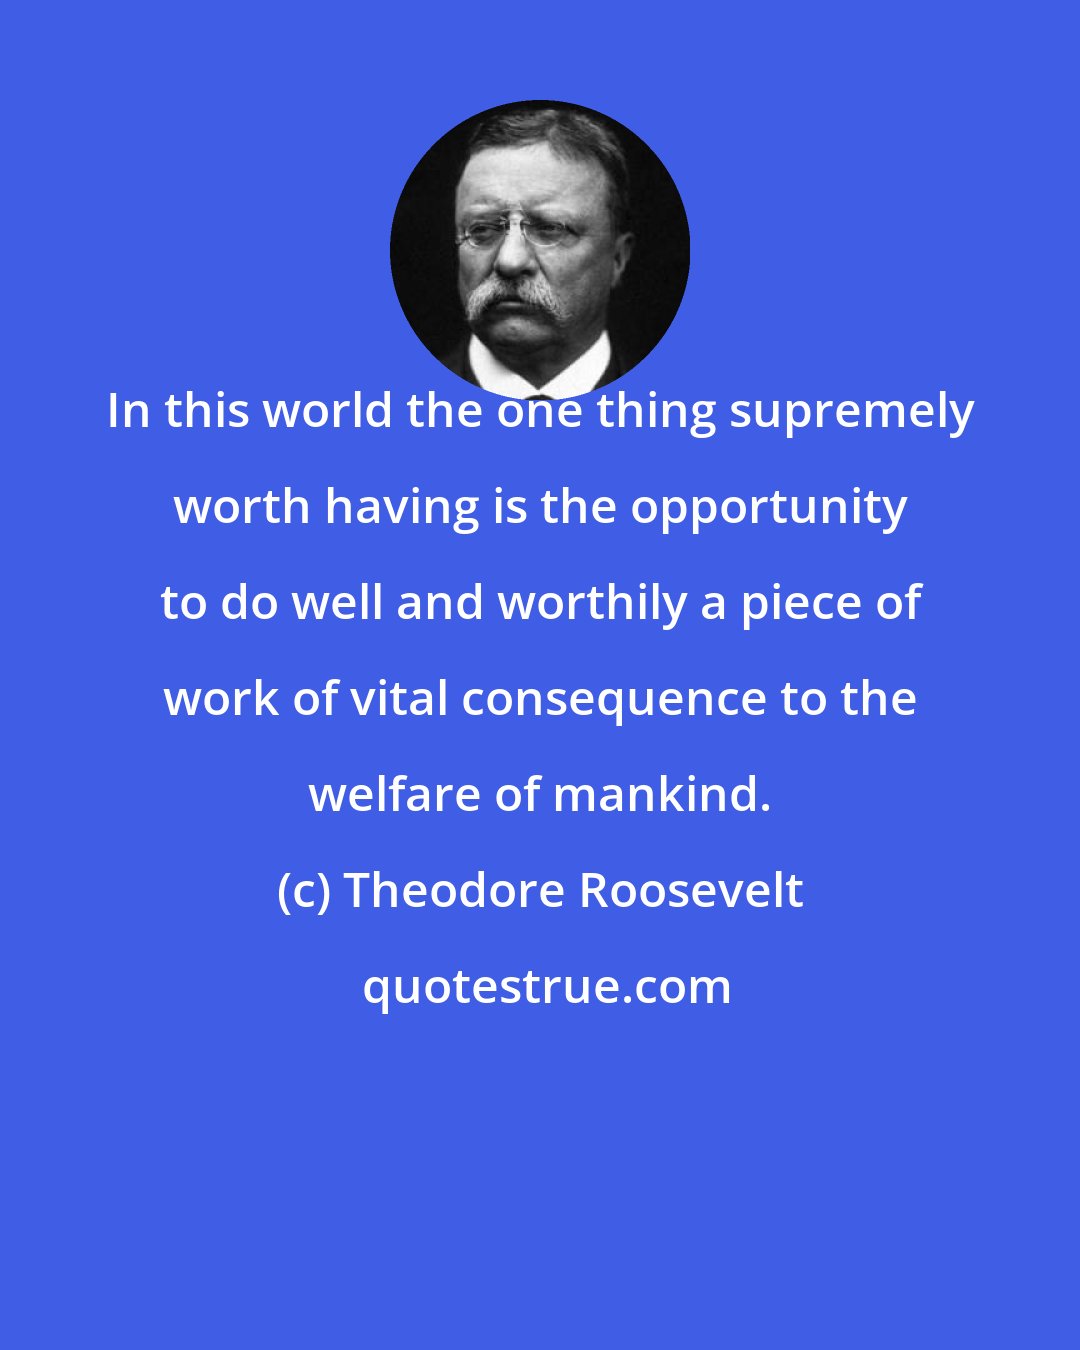 Theodore Roosevelt: In this world the one thing supremely worth having is the opportunity to do well and worthily a piece of work of vital consequence to the welfare of mankind.